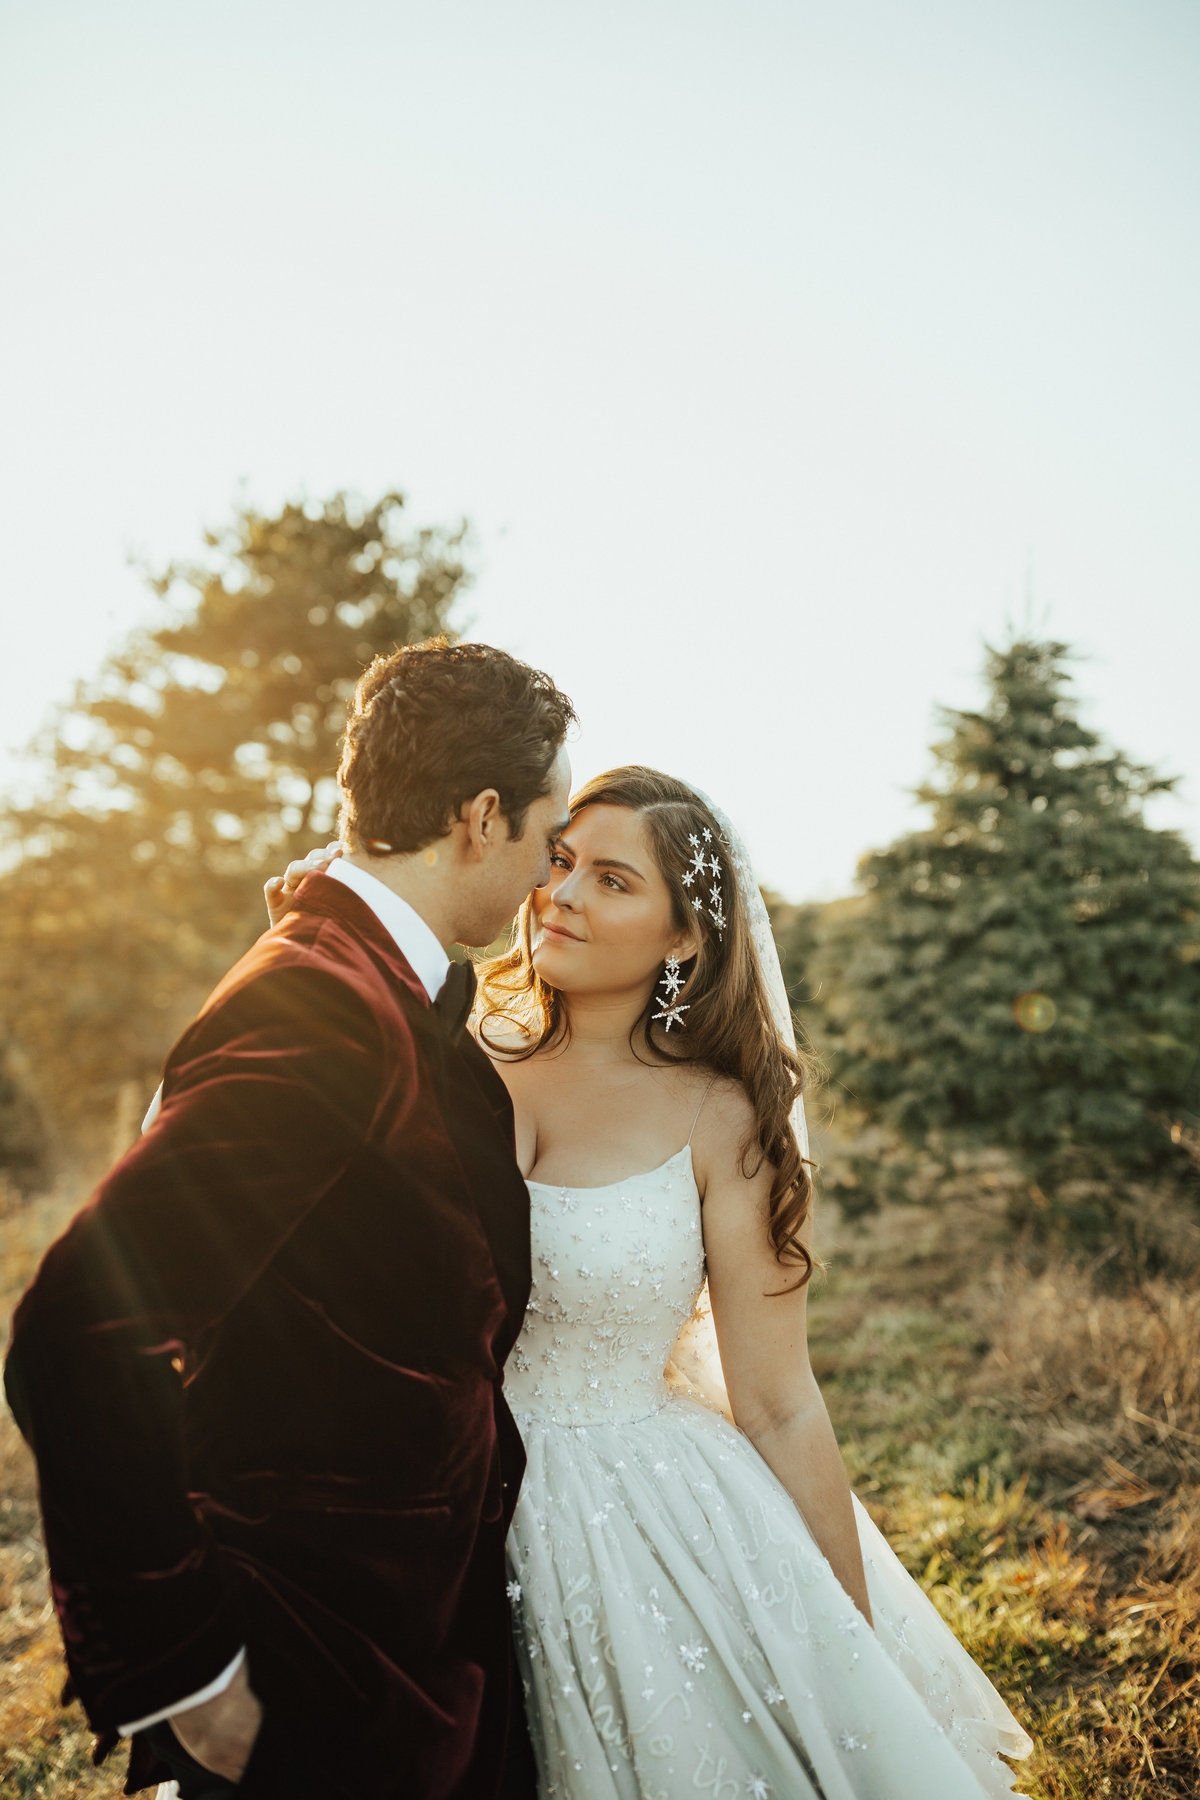 Christy-l-Johnston-Photography-Monica-Relyea-Events-Noelle-Downing-Instagram-Noelle_s-Favorite-Day-Wedding-Battenfelds-Christmas-tree-farm-Red-Hook-New-York-Hudson-Valley-upstate-november-2019-AP1A8630